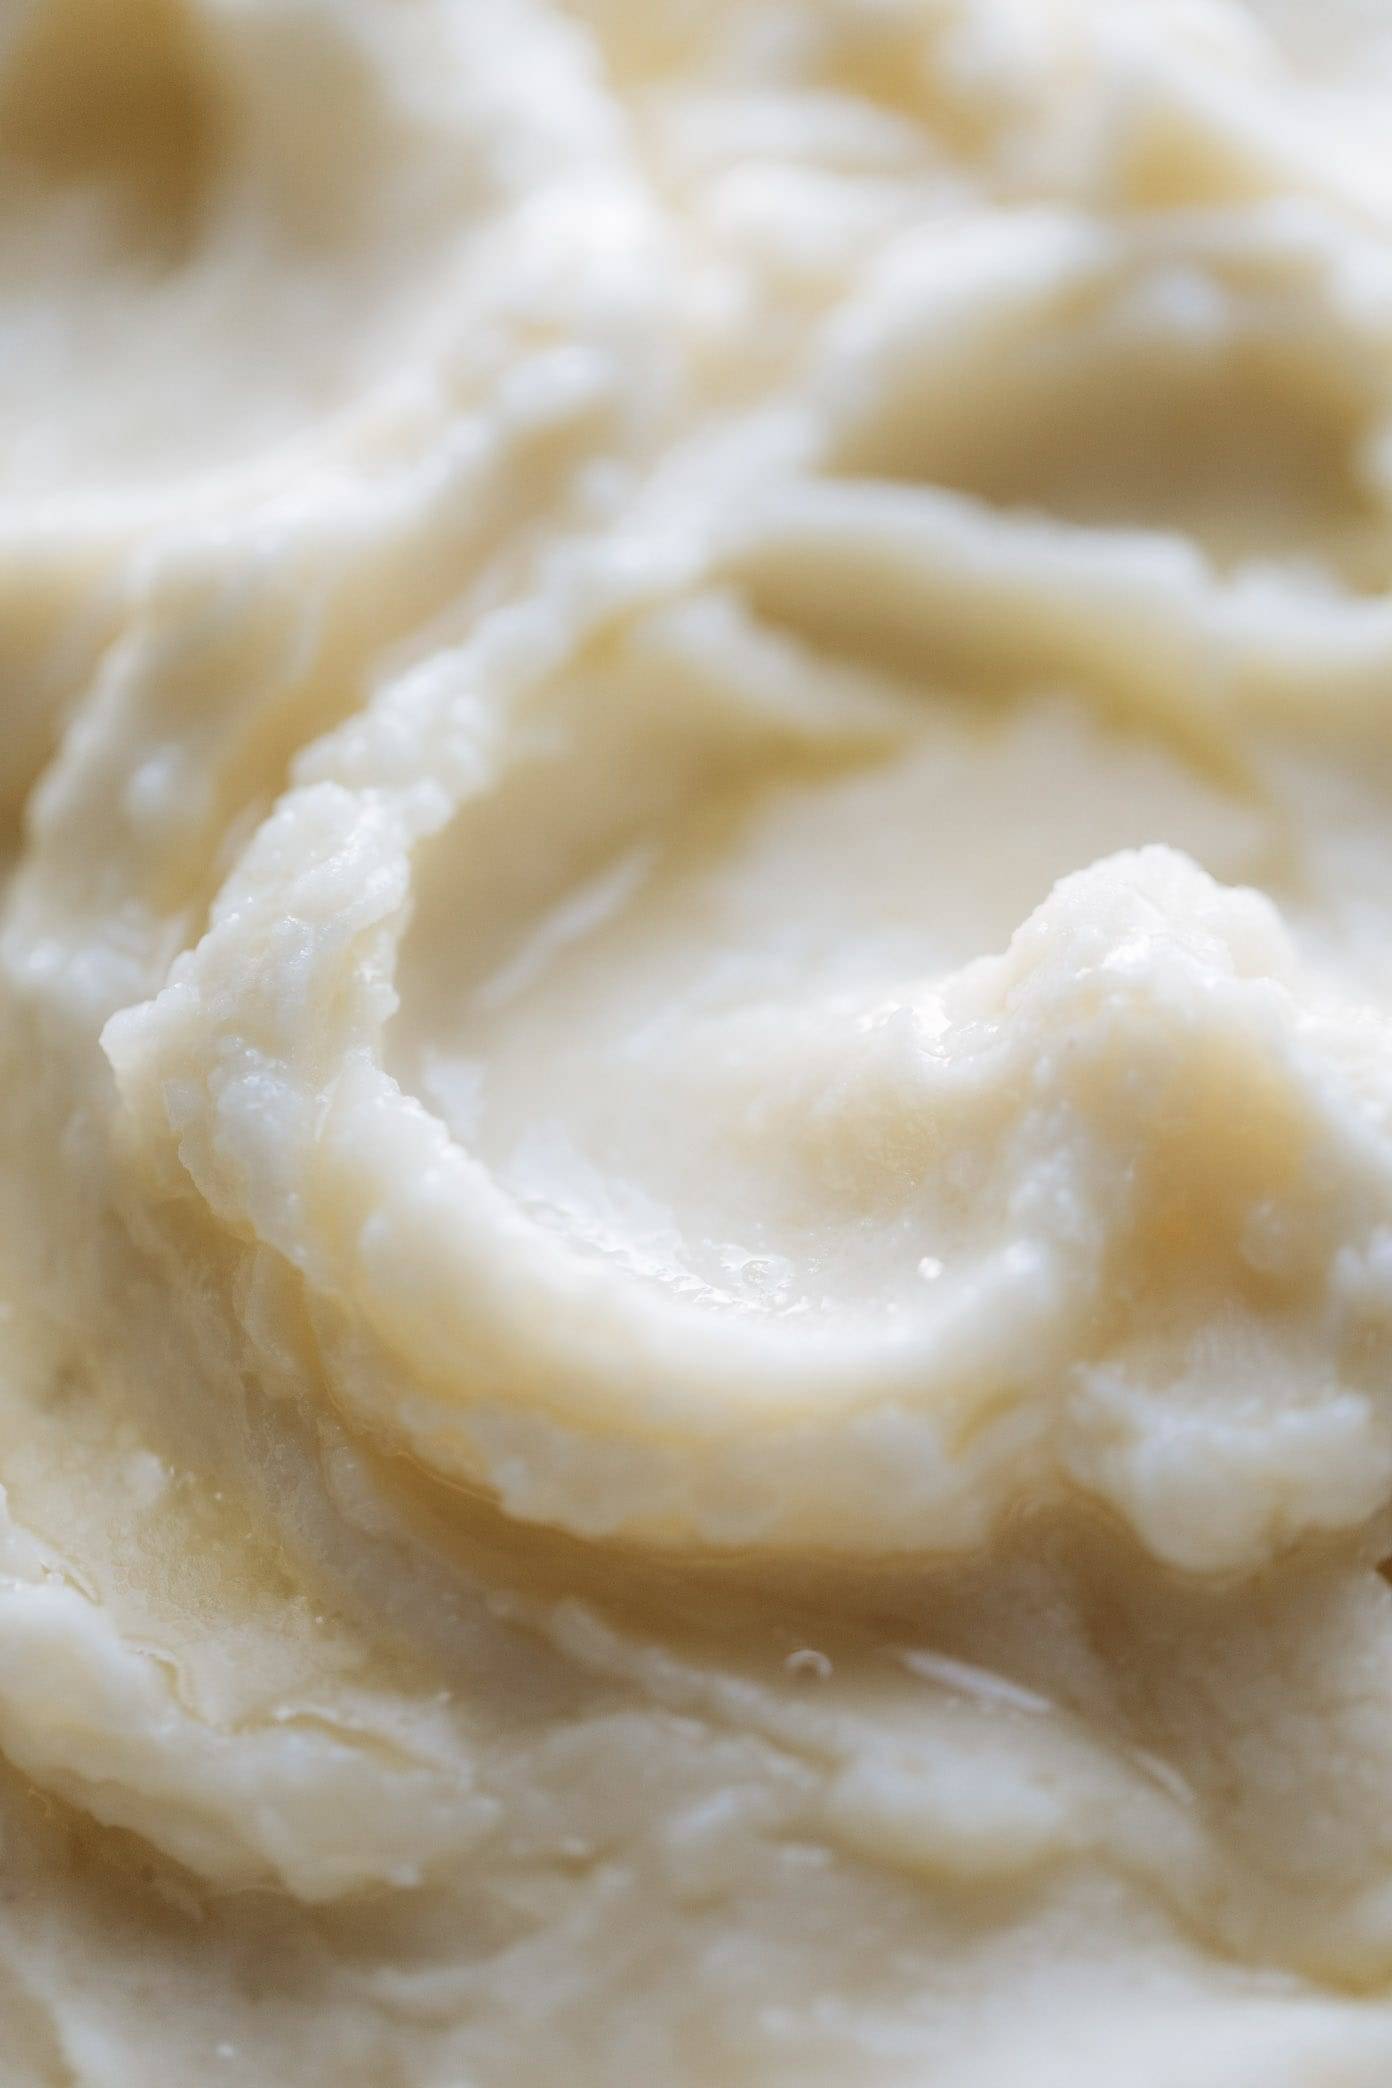 THE BEST Mashed Potatoes! So creamy, so fluffy, and SO GOOD. Made in the Instant Pot!